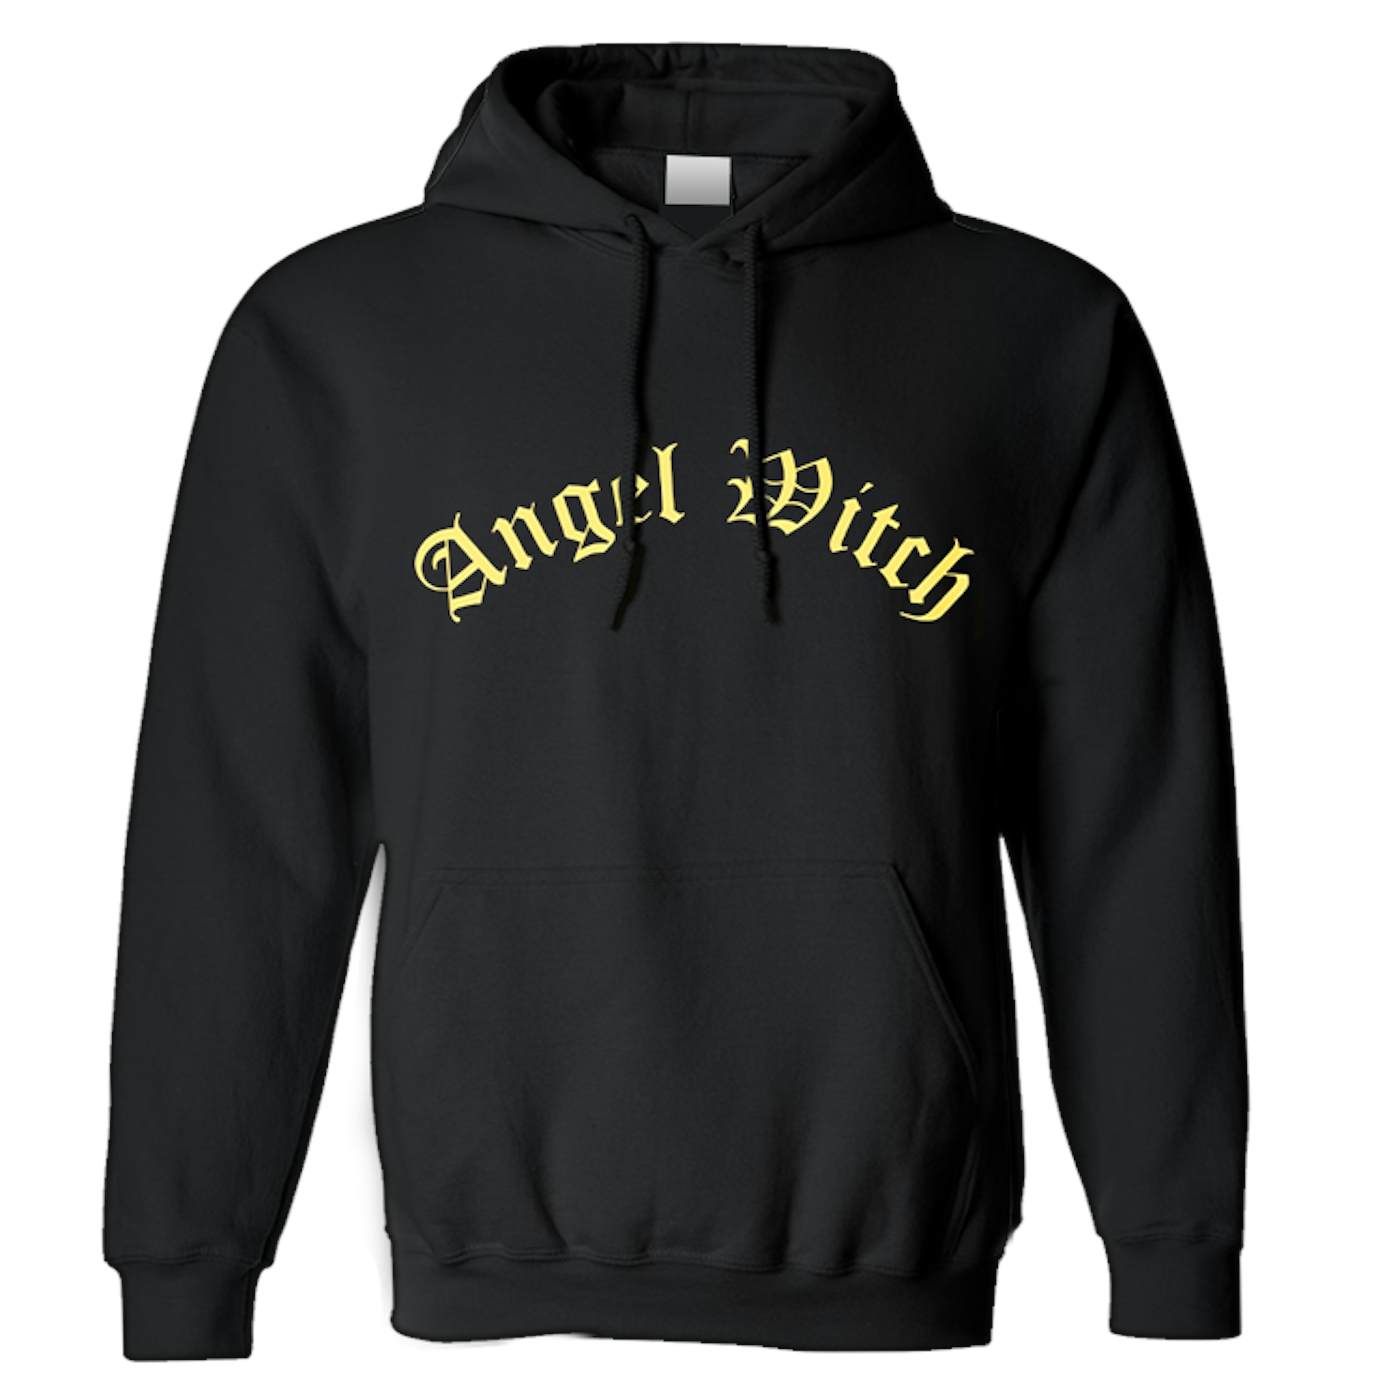 ANGEL WITCH - 'Angel Witch' Pullover Hoodie